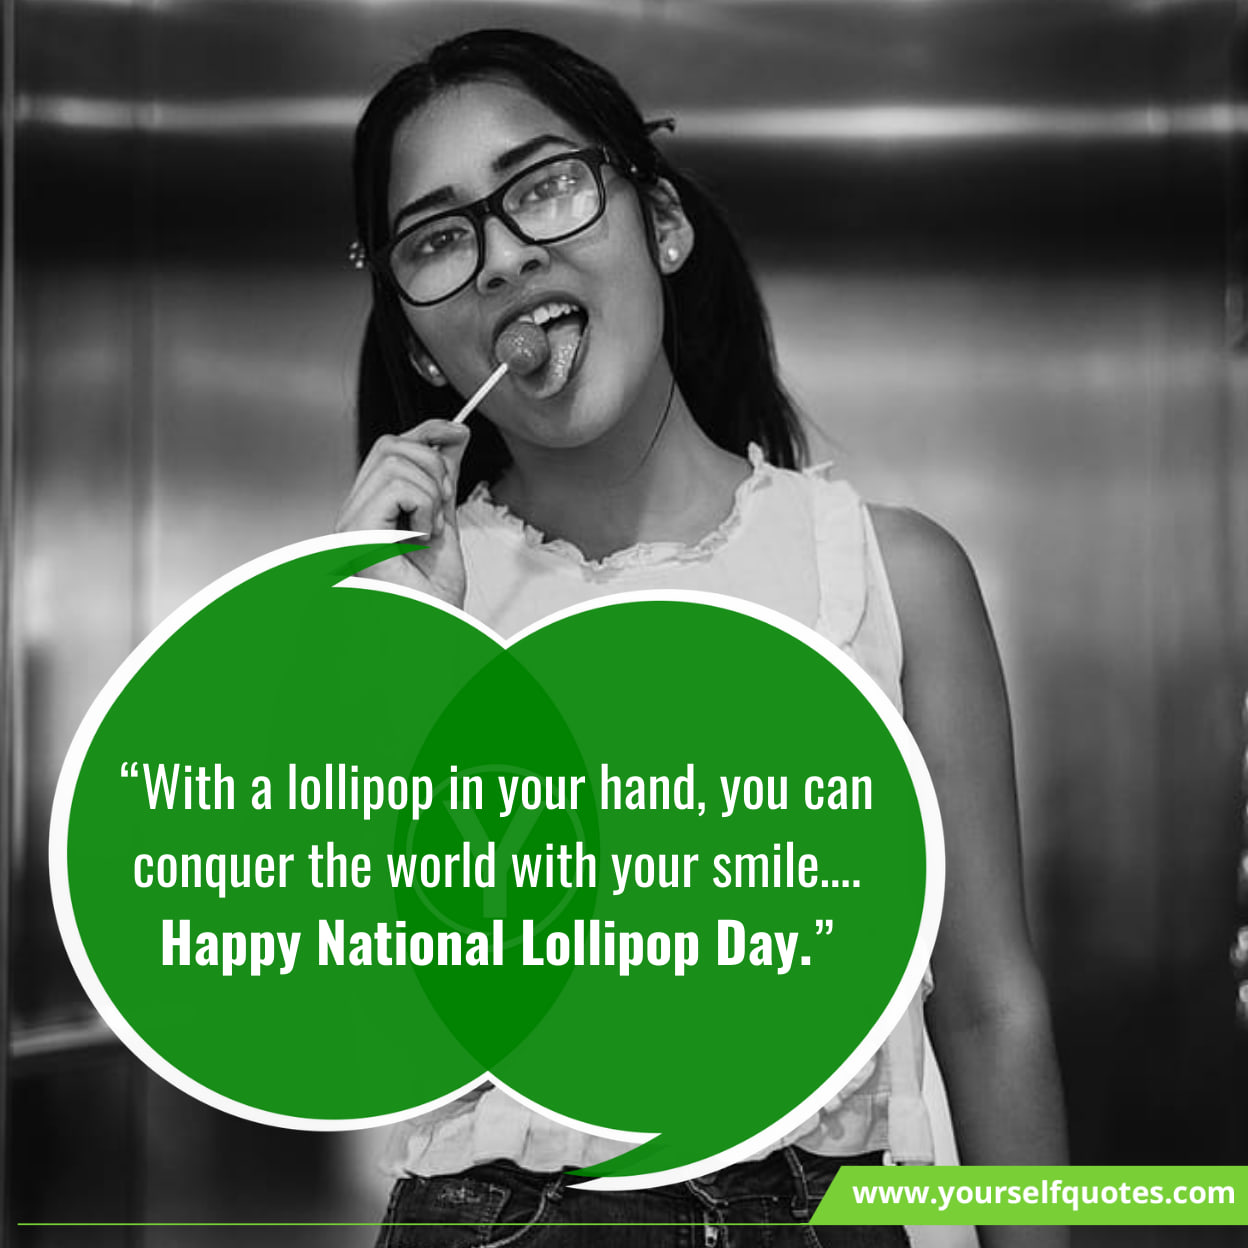 National Lollipop Day Funny Captions & Greetings